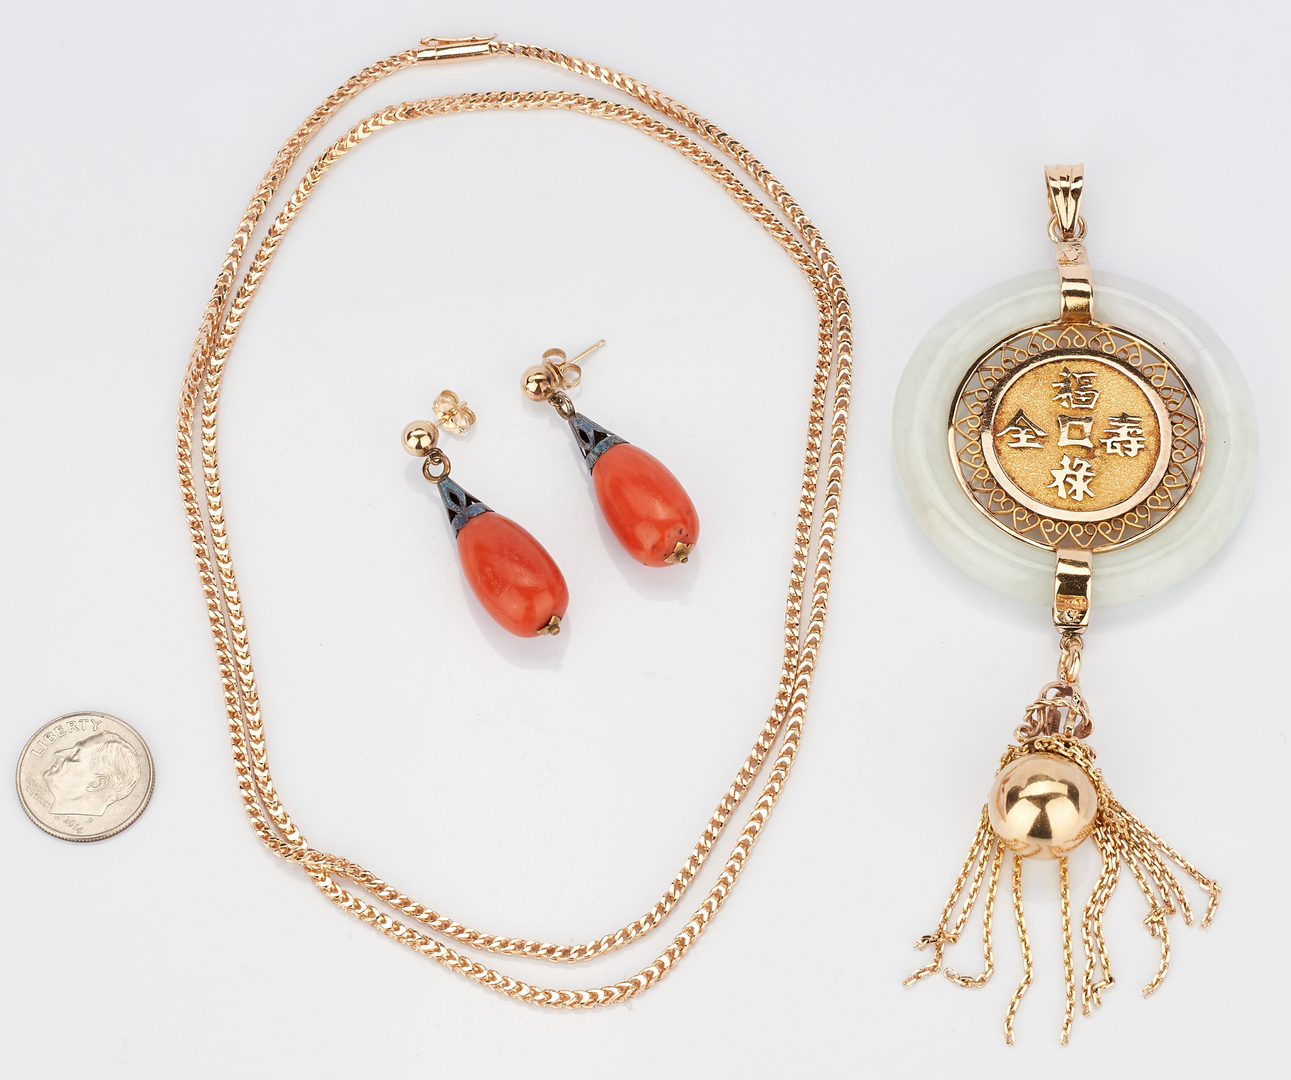 Lot 20: 18K jade pendant & chain with 14K coral earrings